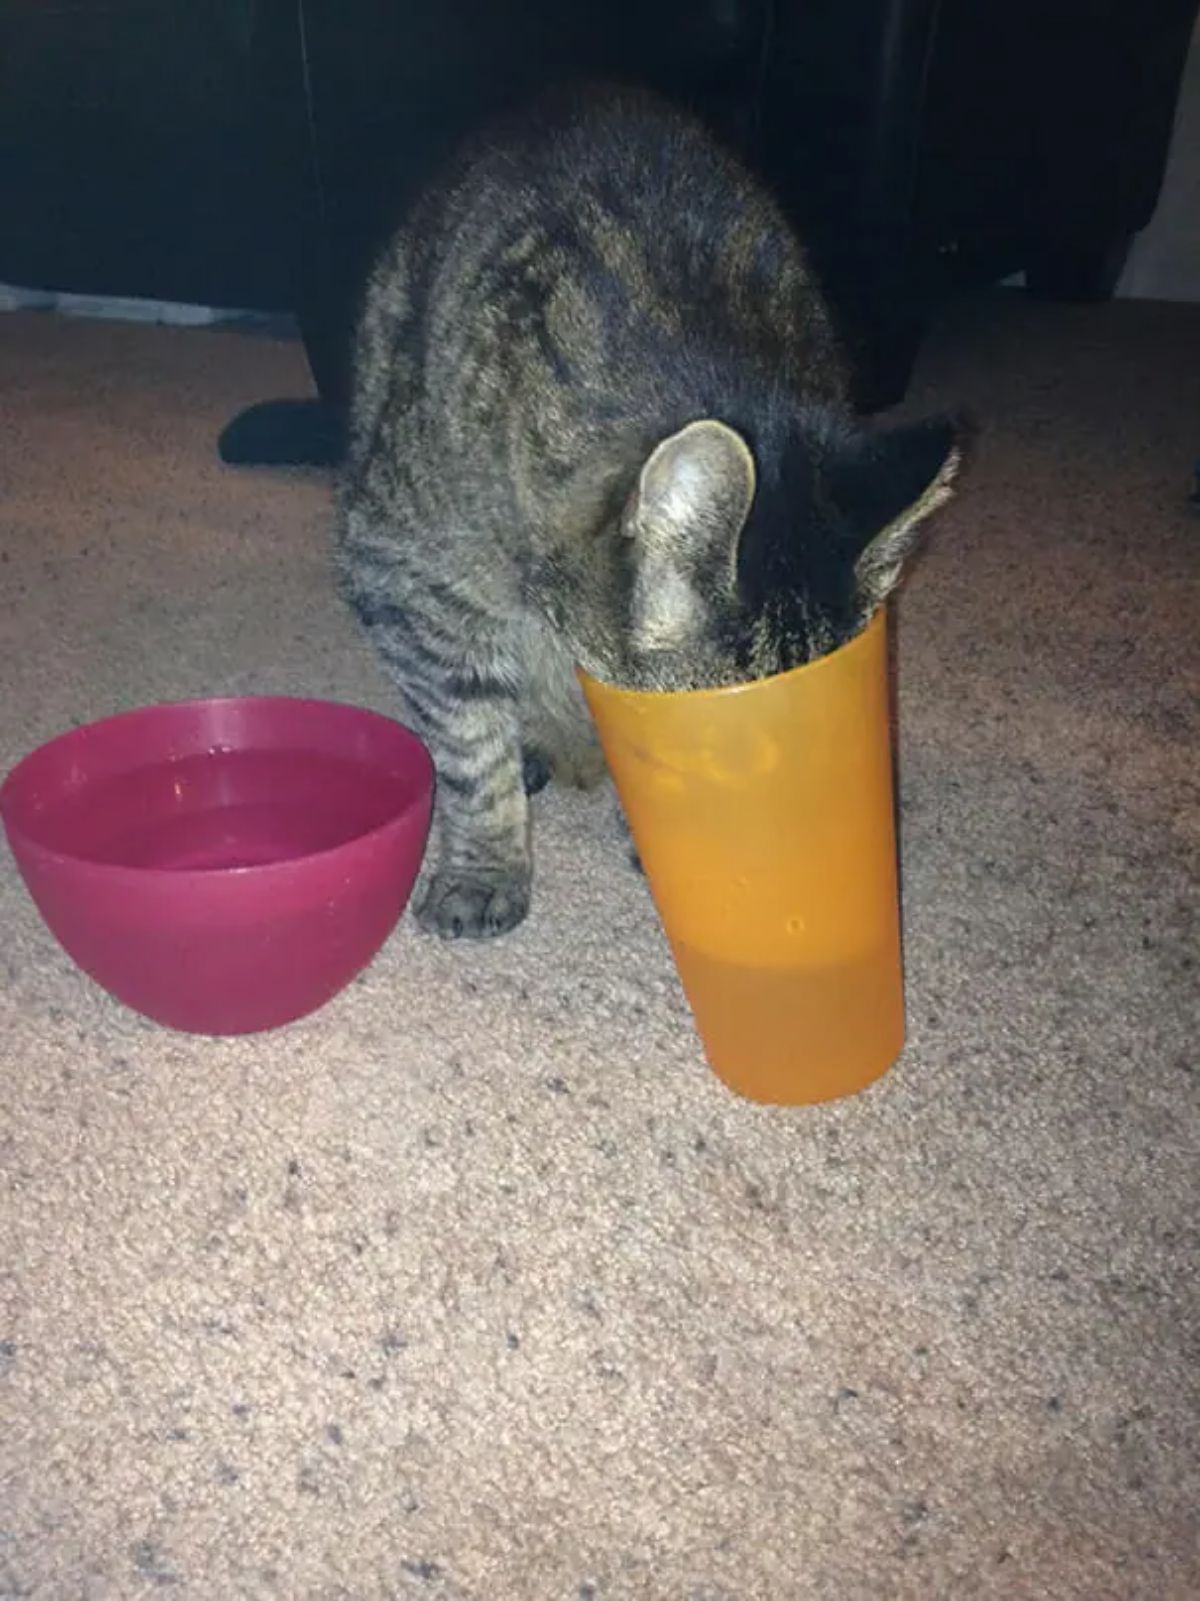 grey tabby cat drinking water out of a yellow plastic cup on the floor next to a pink plastic bowl of water